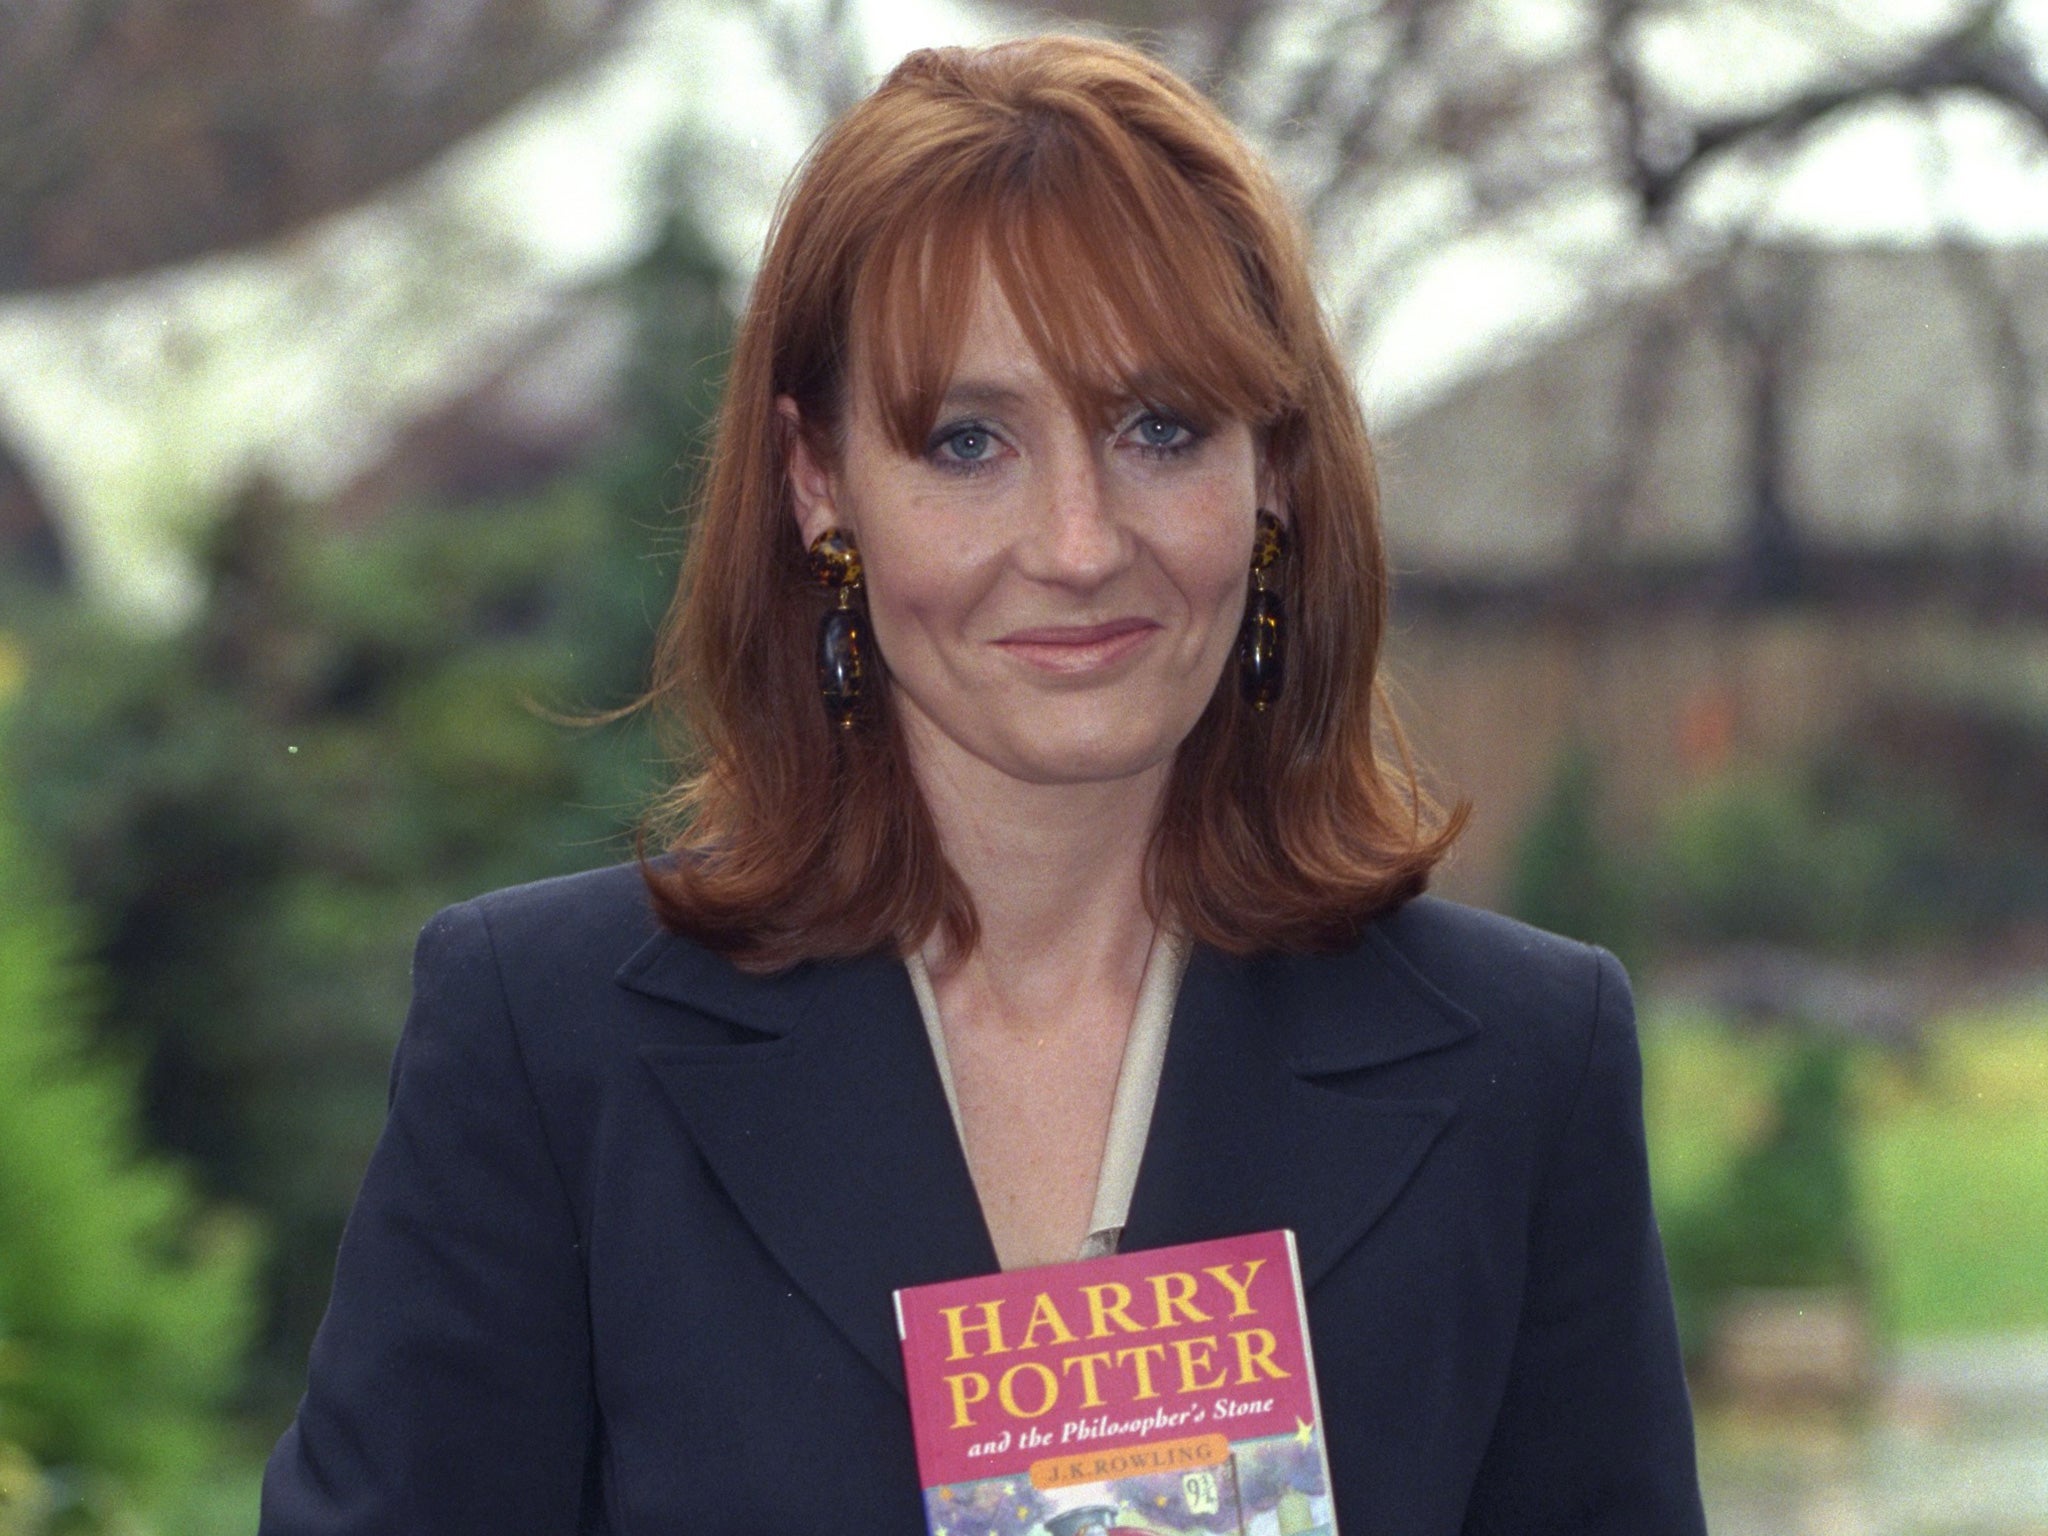 JK Rowling with her first Harry Potter book in 1997